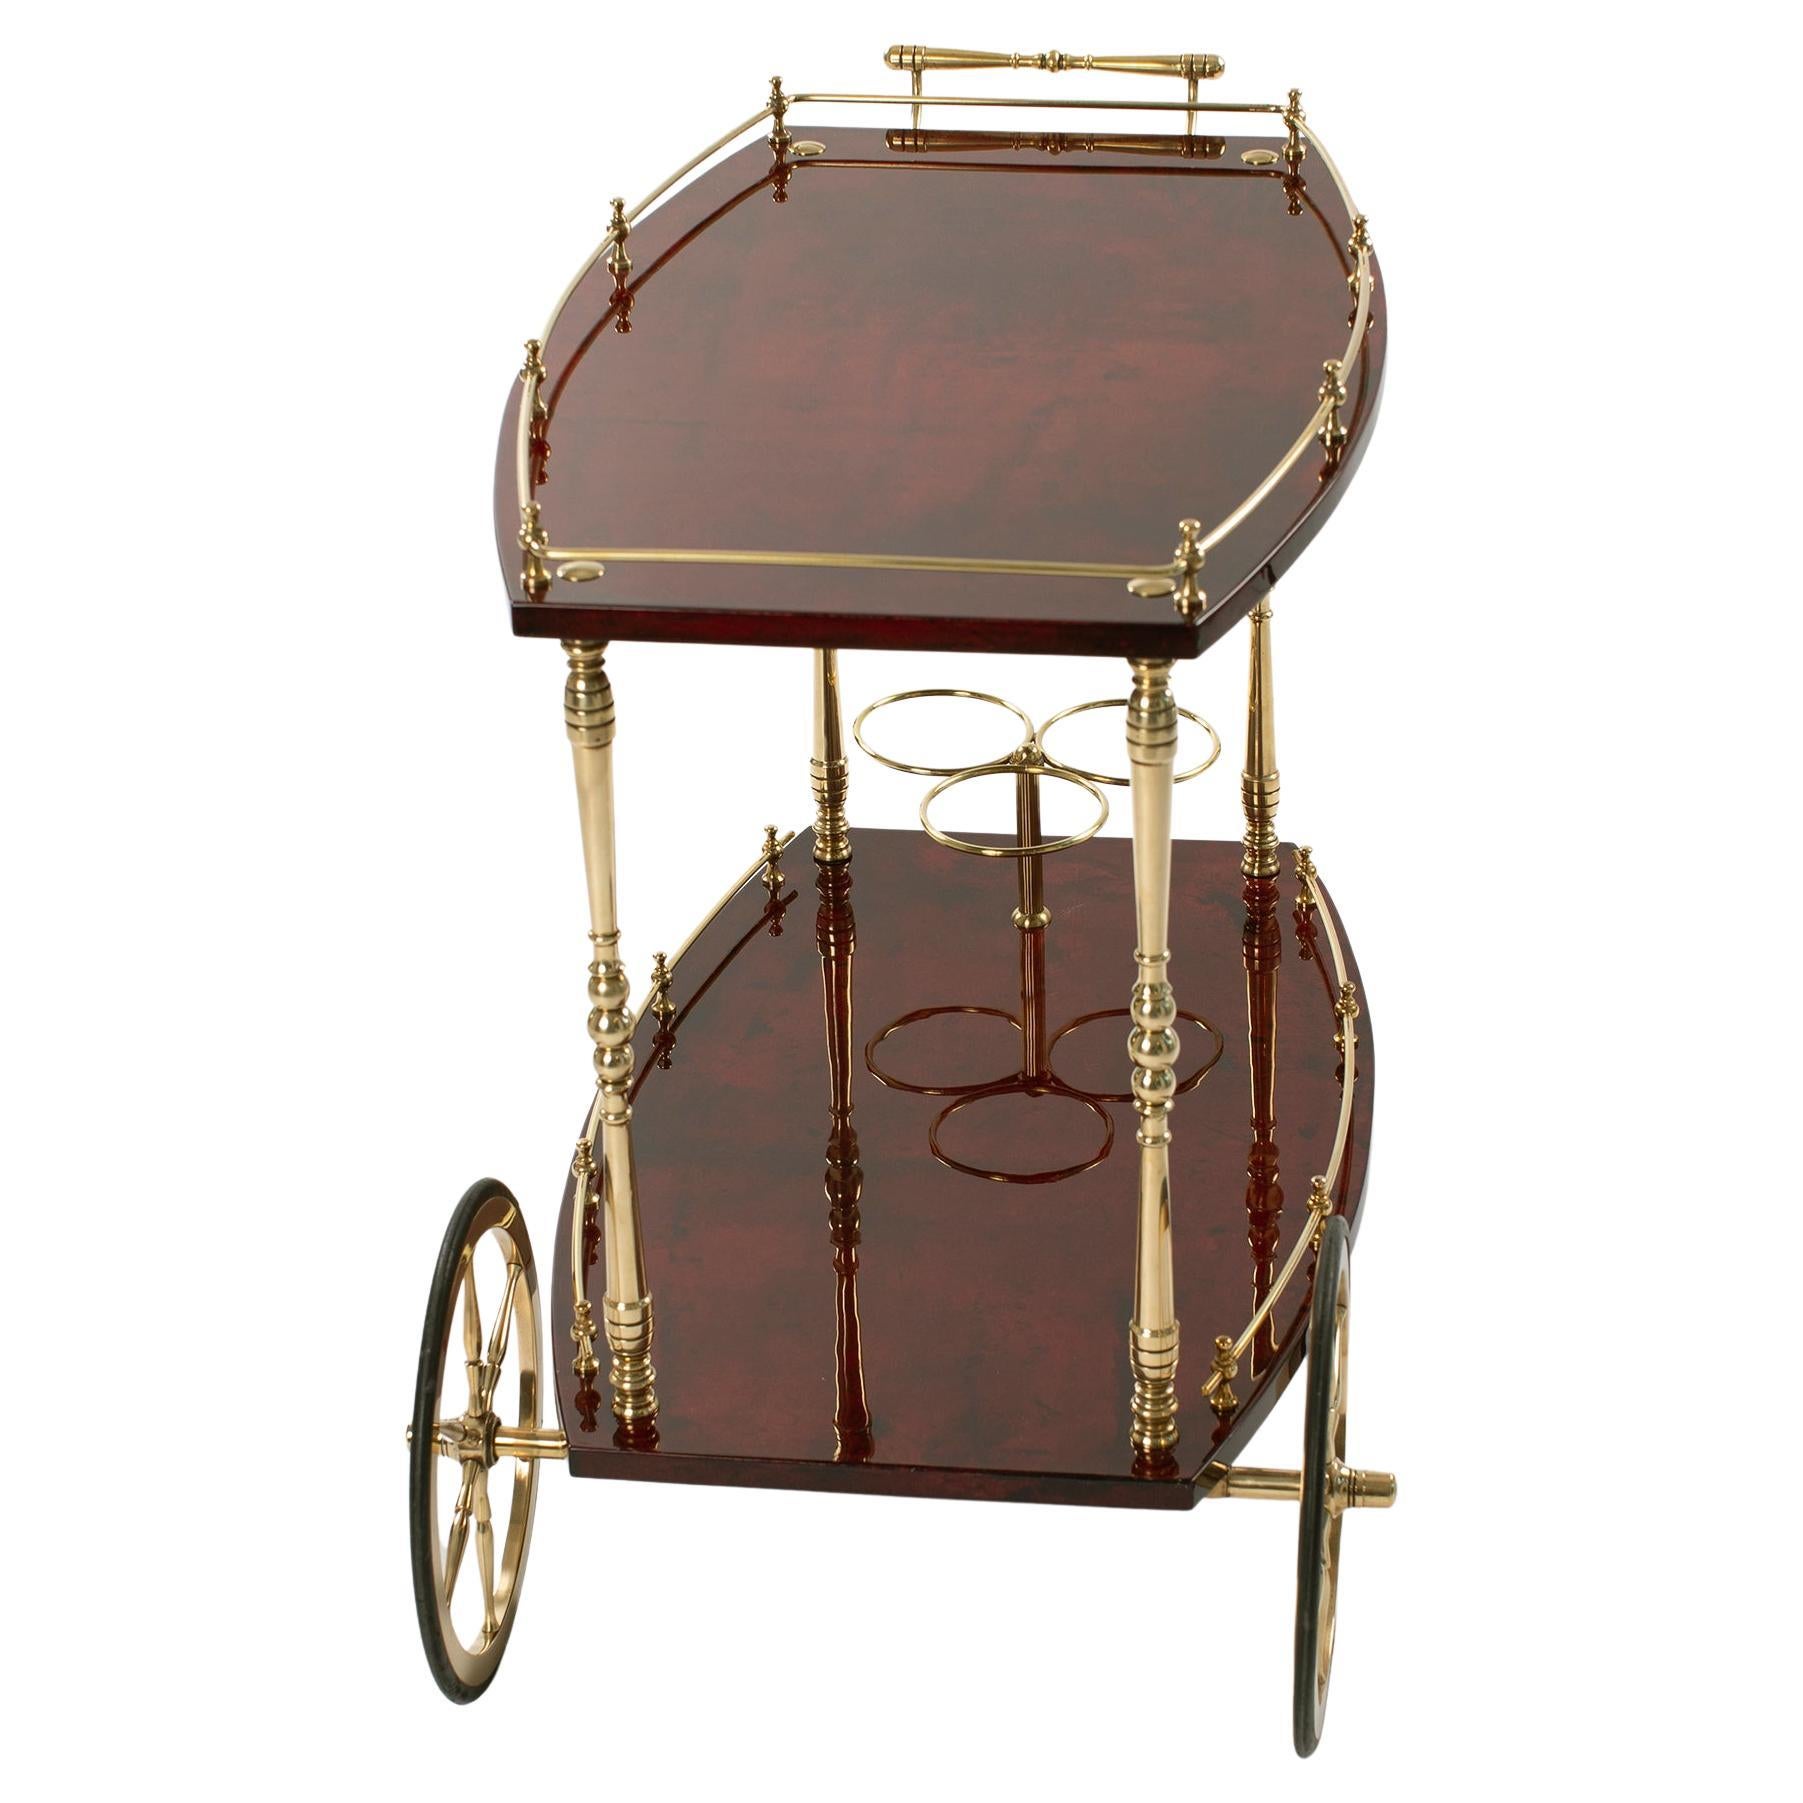 Italian Mid-Century Bar Cart in Dark Red Goatskin and Brass by Aldo Tura 1970s
Exceptional bar cart since both the shape as well as the dark red color make the object an eye-catcher. 
The bar car was completely restored.
That means, completely